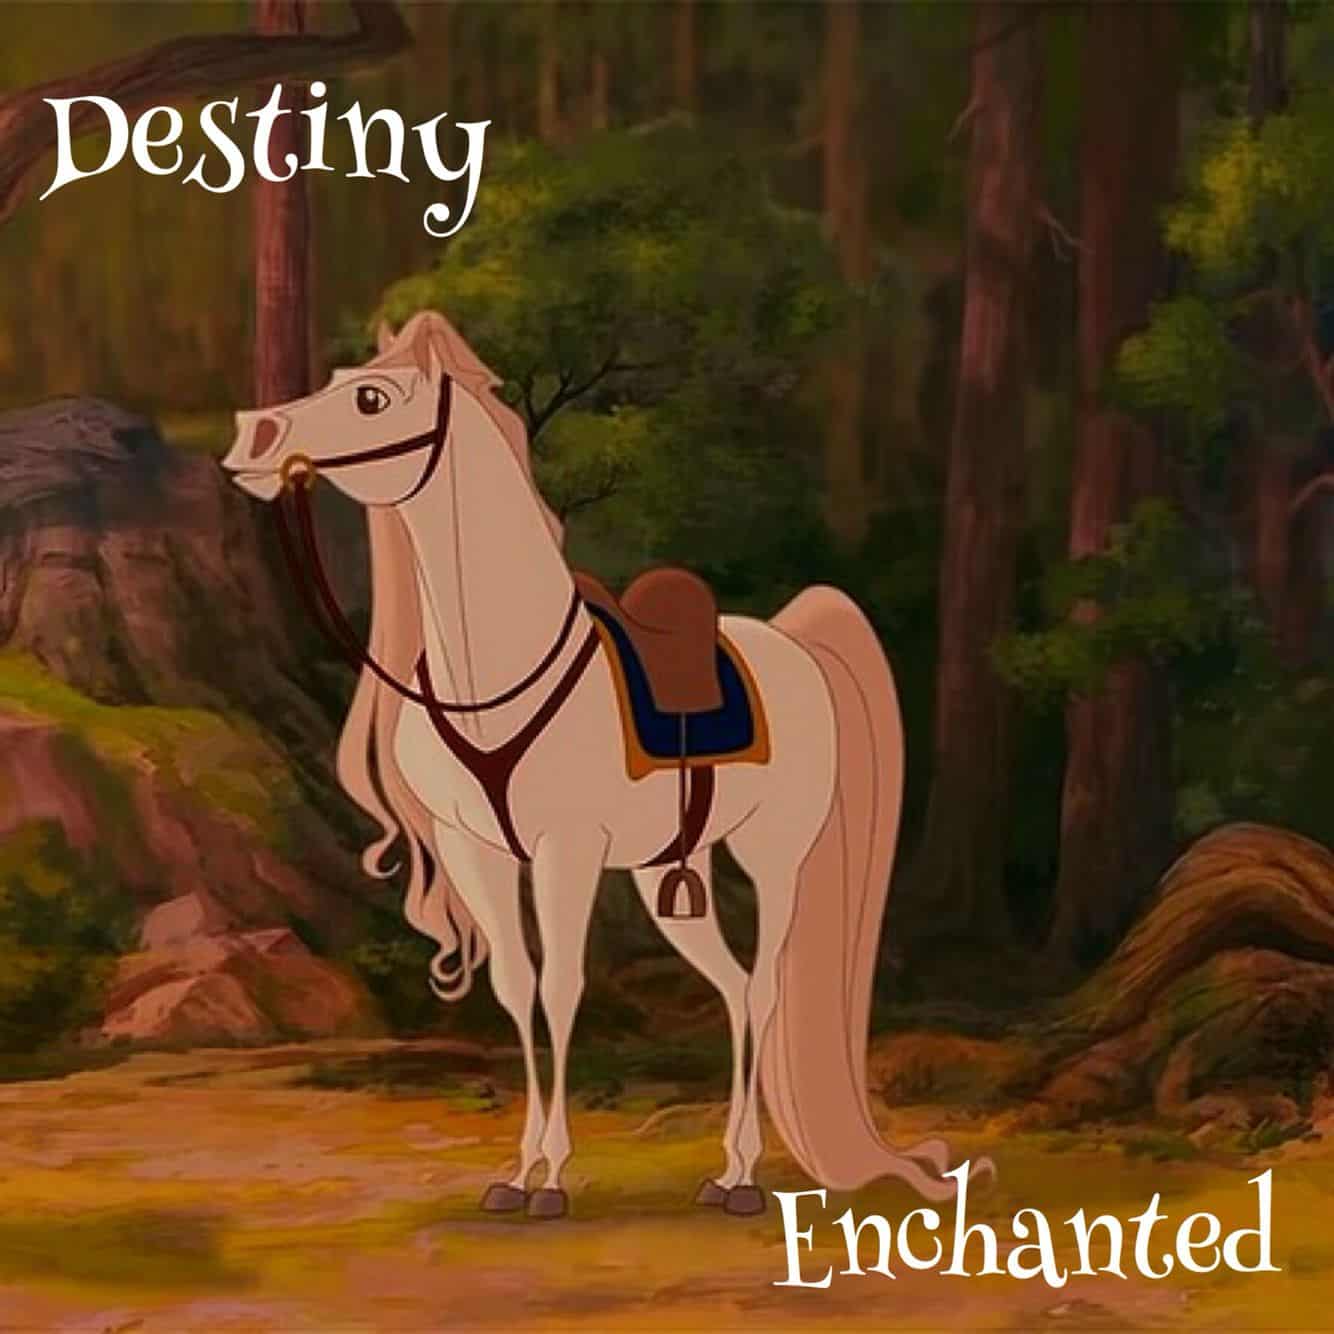 Destiny from Enchanted